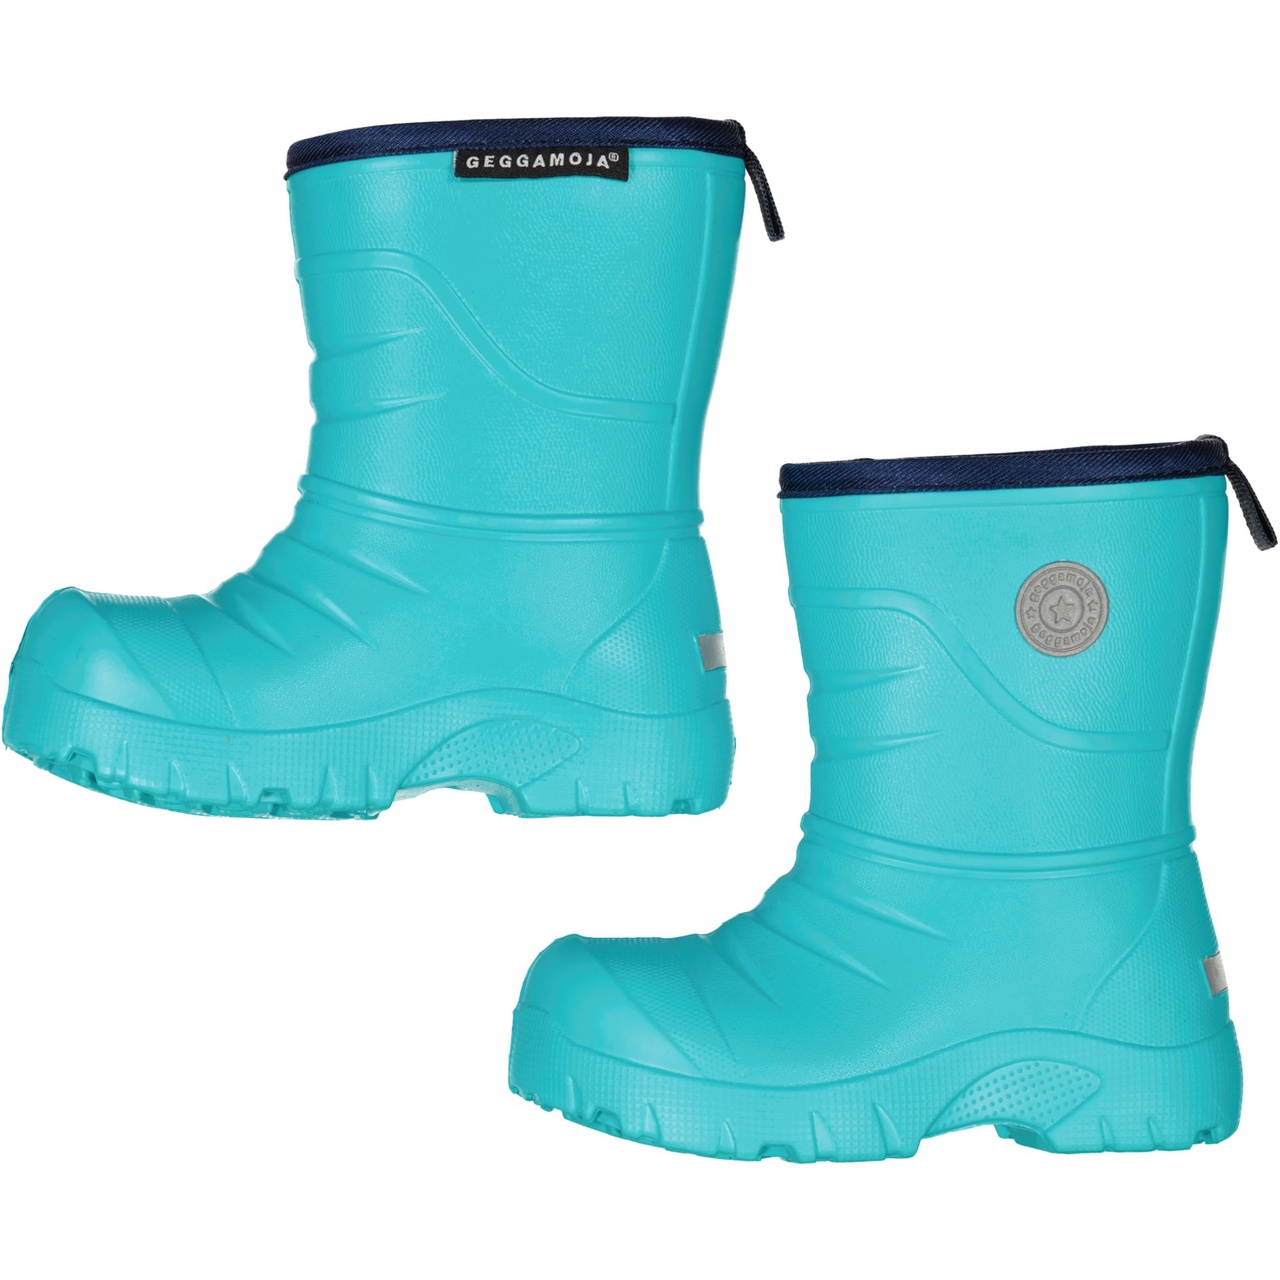 All-weather Boot Turquoise 31